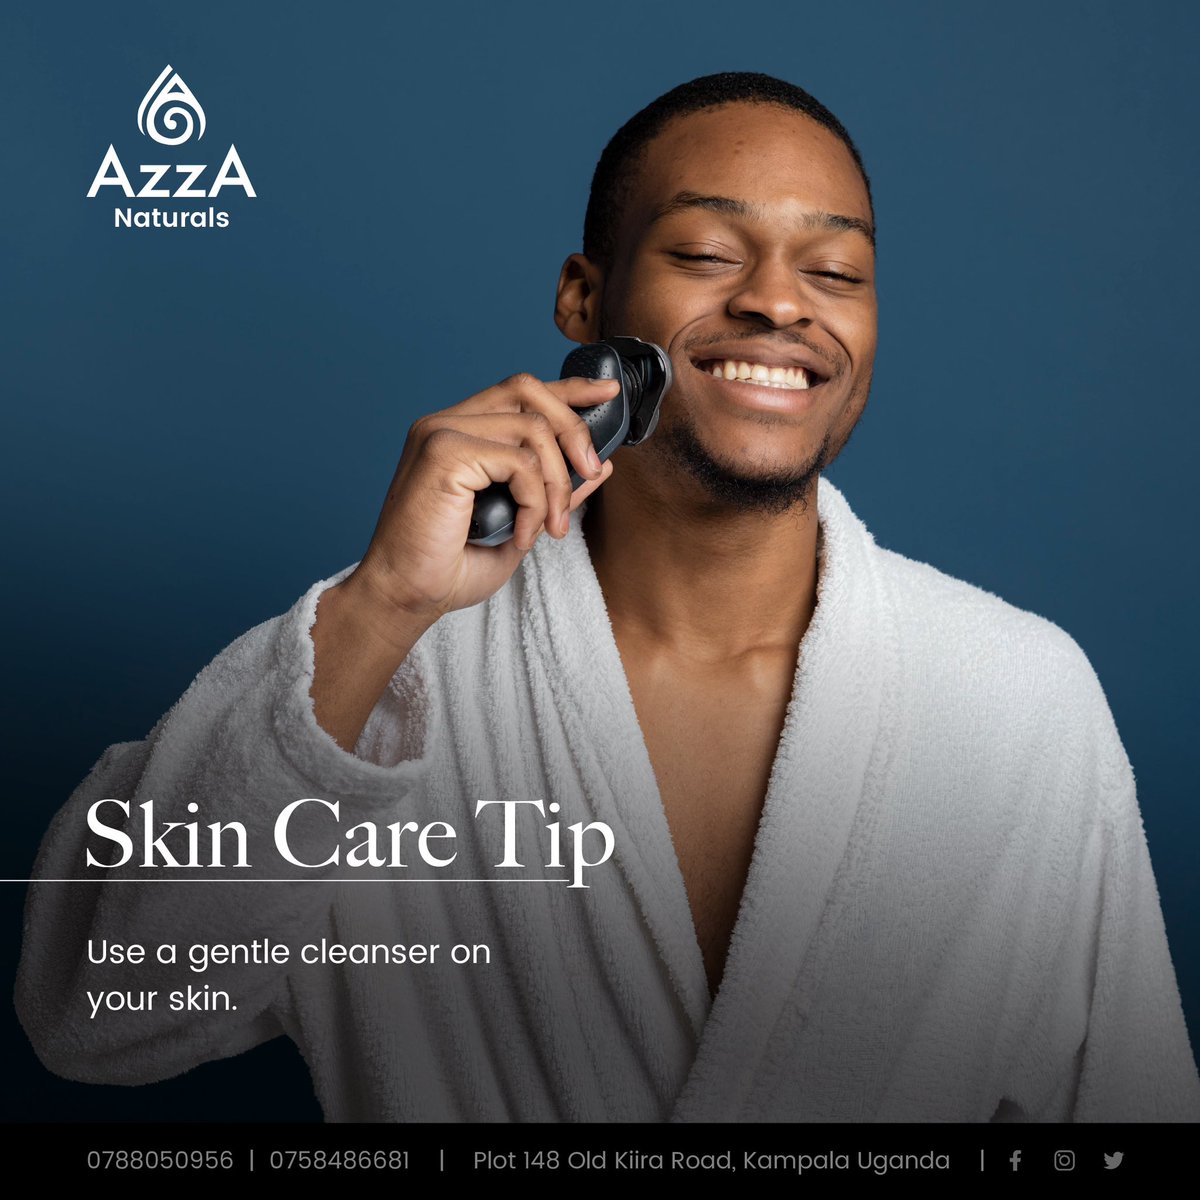 Using a gentle cleanser on your skin will have a healthy barrier function and natural oils to protect your skin and the right levels of hydration.

#AzzaNaturals #faceoil #bodyoil #beauty #naturaskincare #healthyskin #skincareproducts #skincarecommunity #selfcare #acne